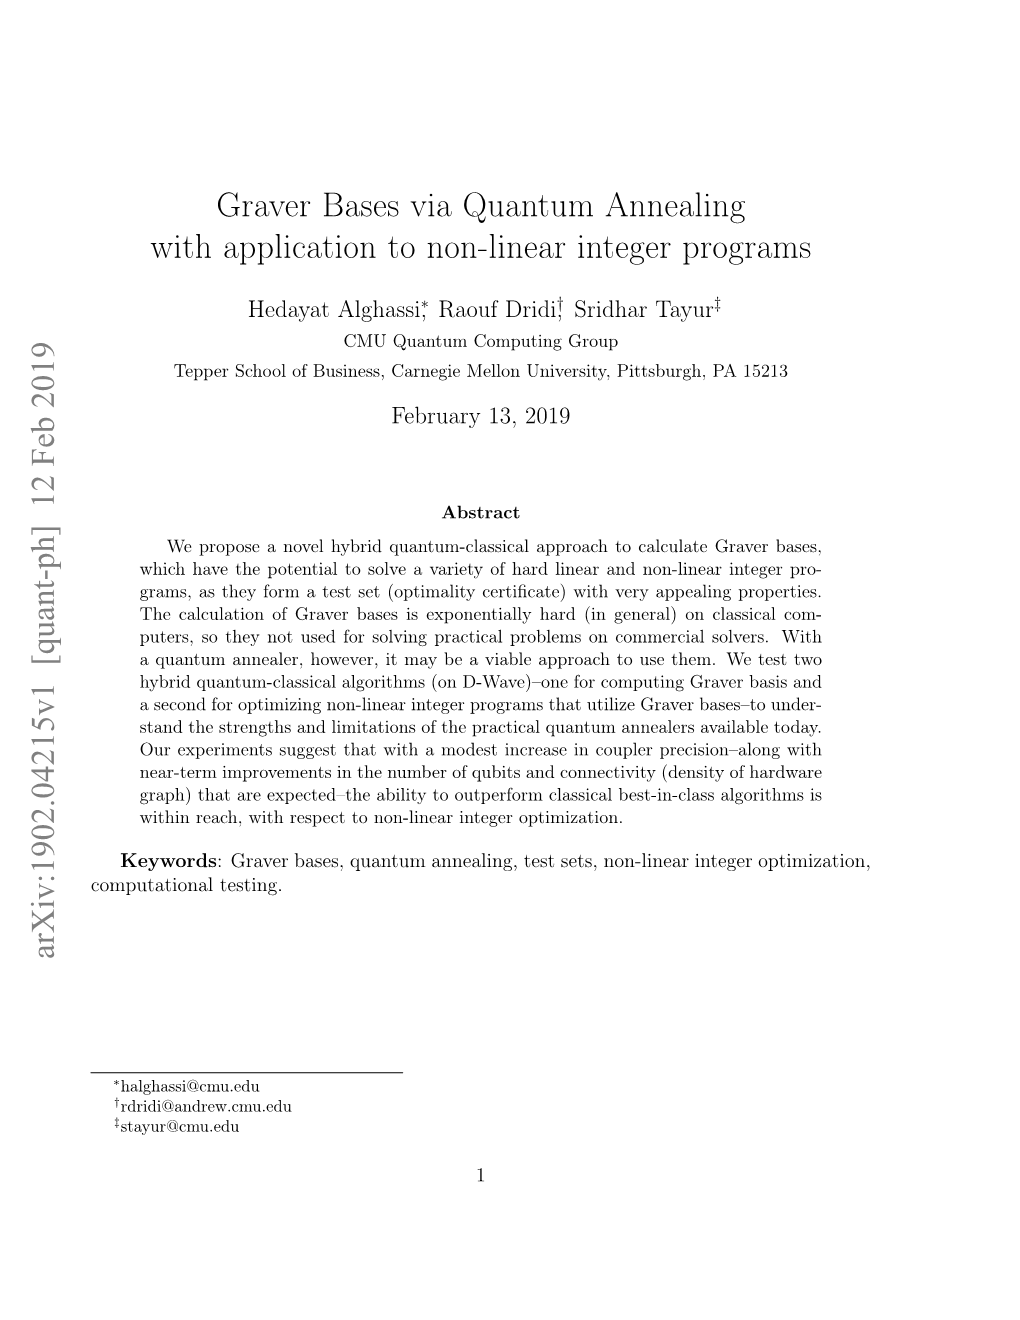 Graver Bases Via Quantum Annealing with Application to Non-Linear Integer Programs